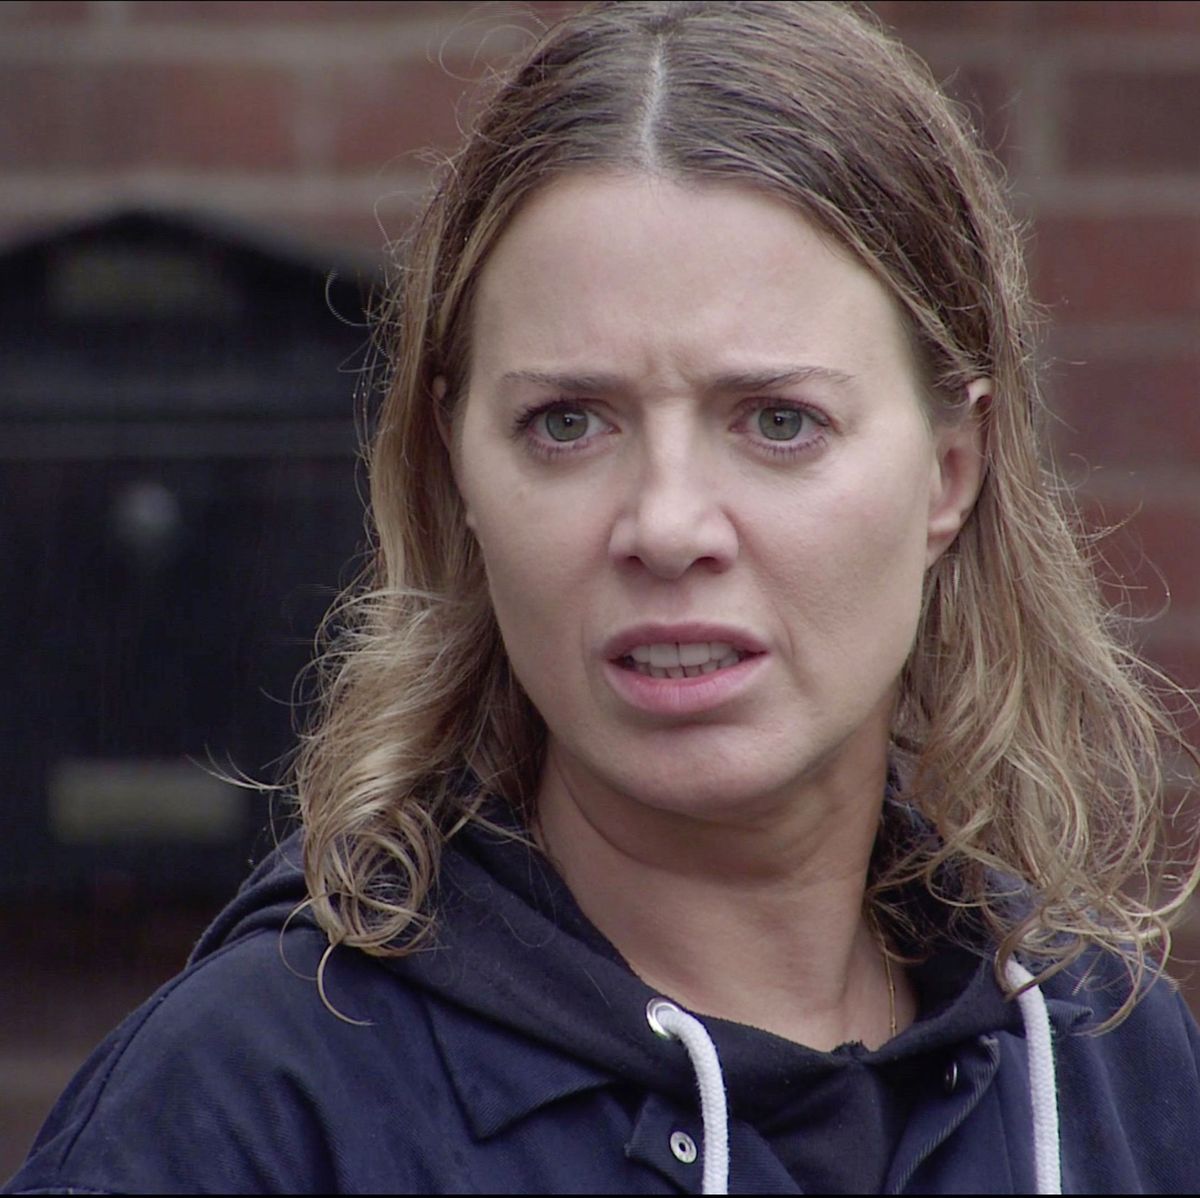 Coronation Street reveals whether Abi is pregnant